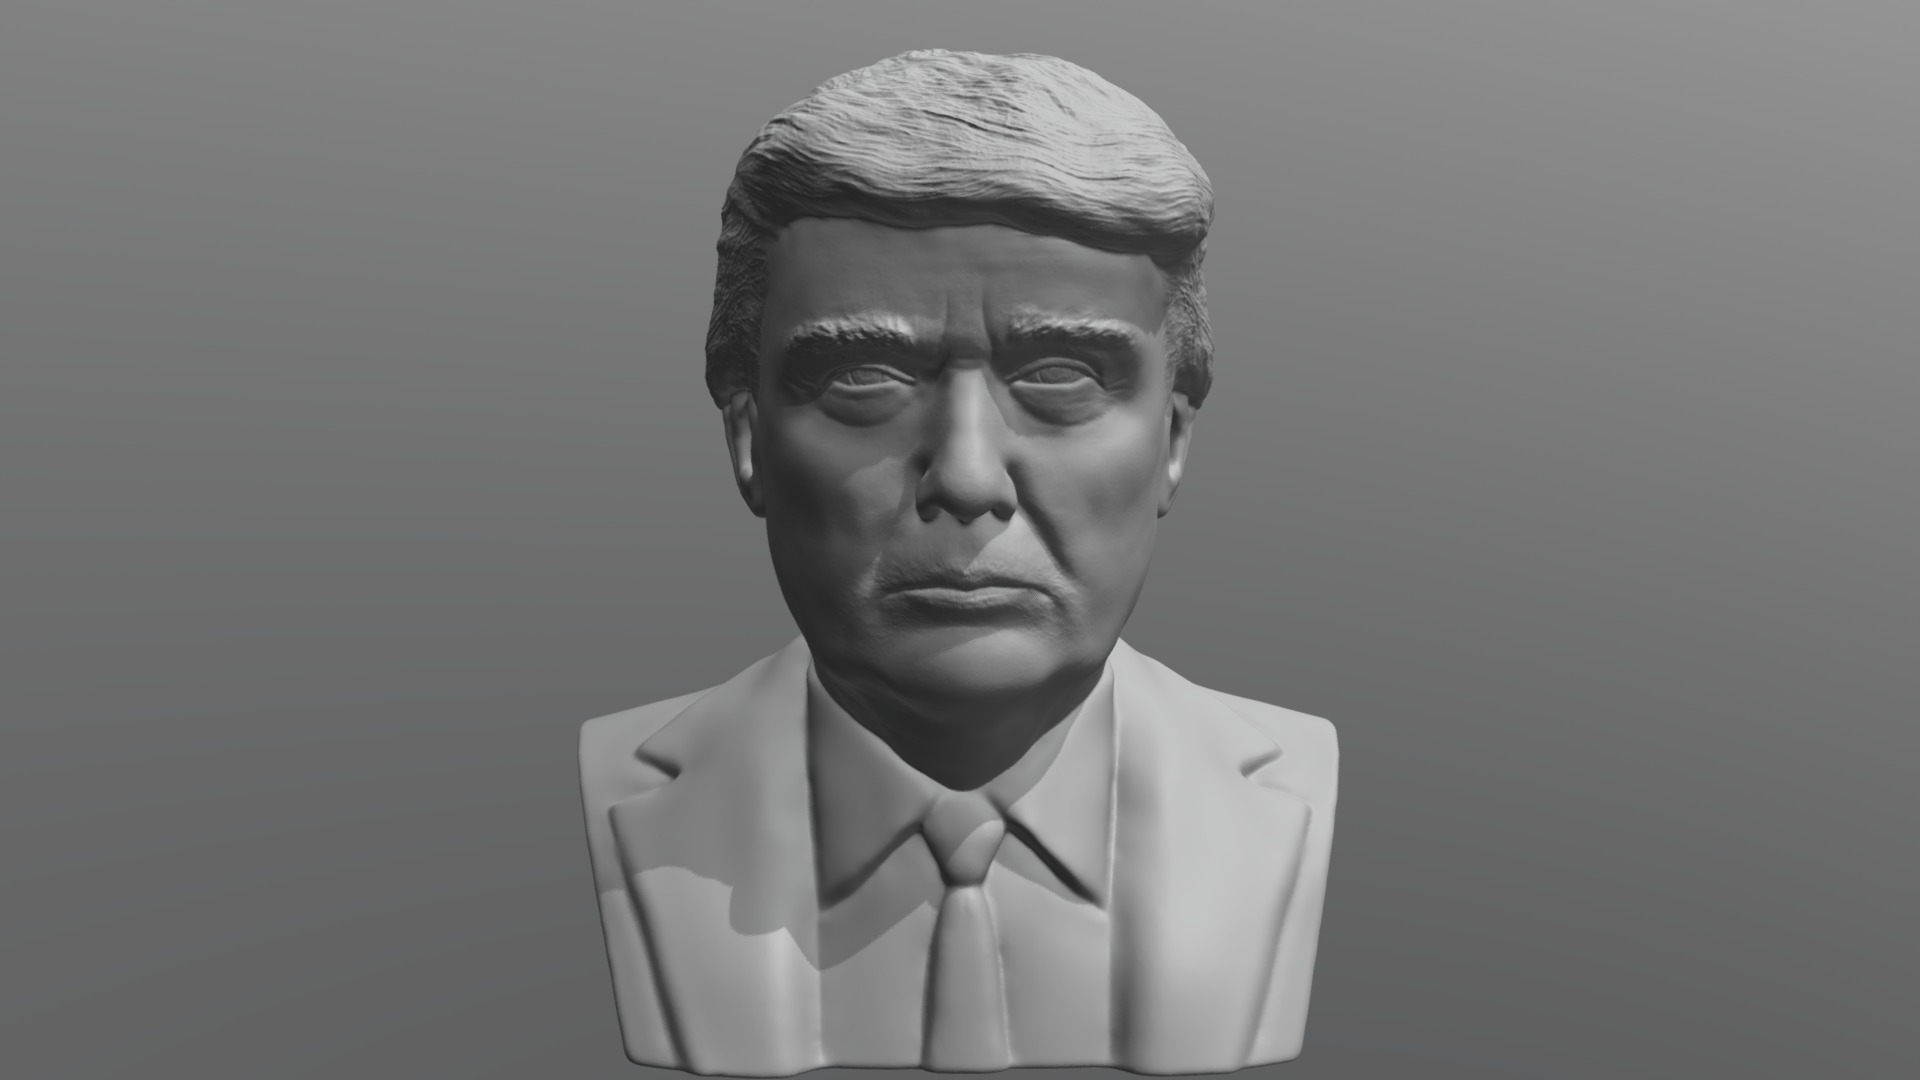 3D model Donald Trump bust for 3D printing - This is a 3D model of the Donald Trump bust for 3D printing. The 3D model is about a man wearing a suit and tie.